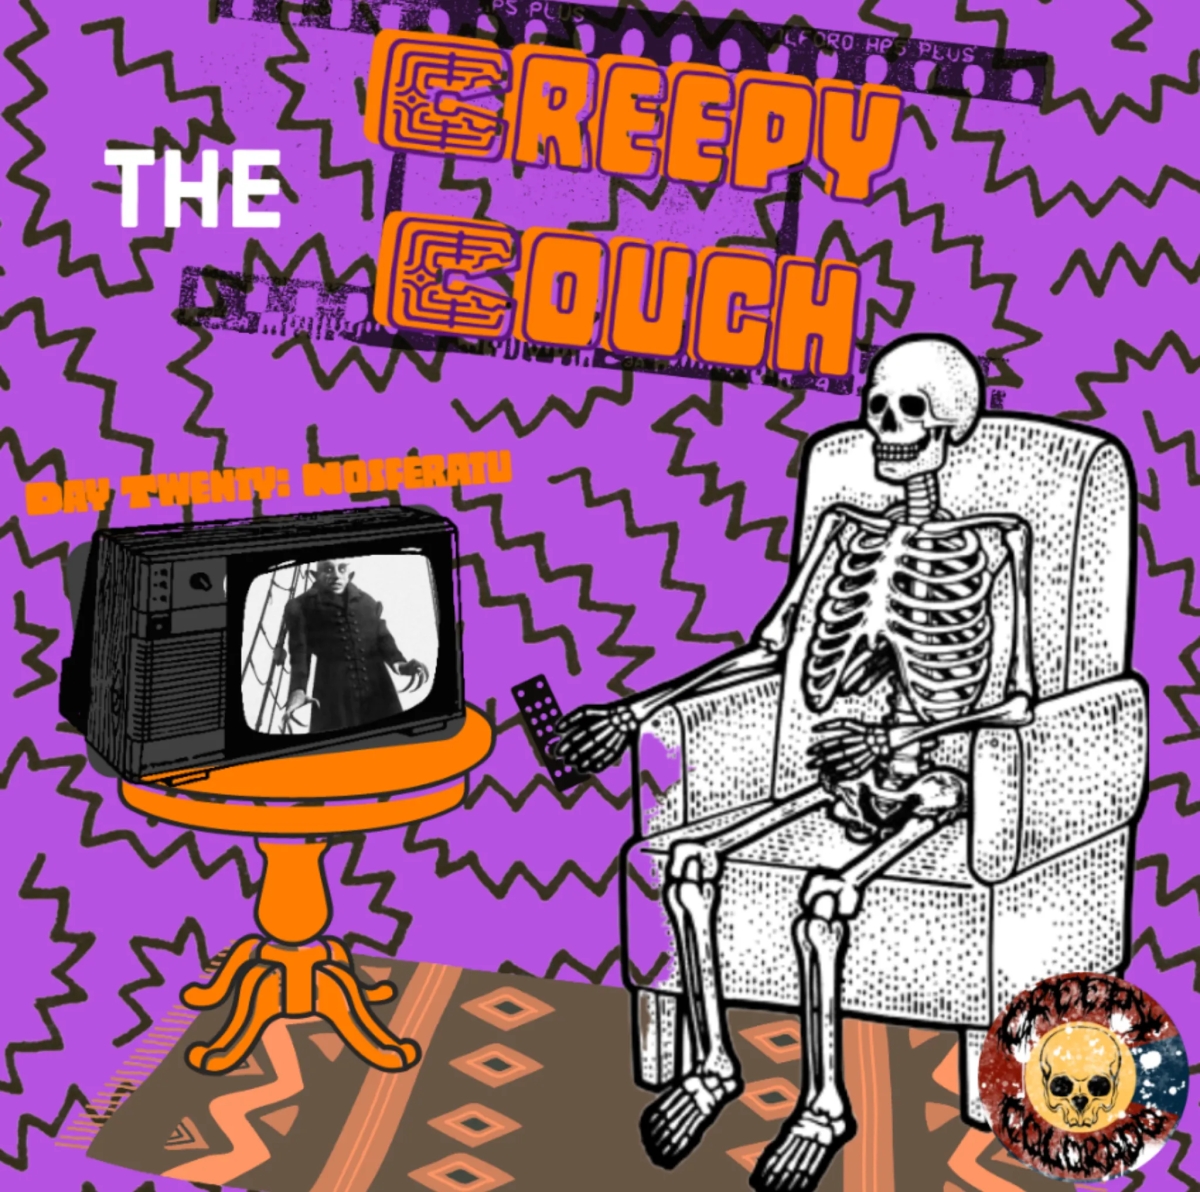 Day 20: The Creepy Couch